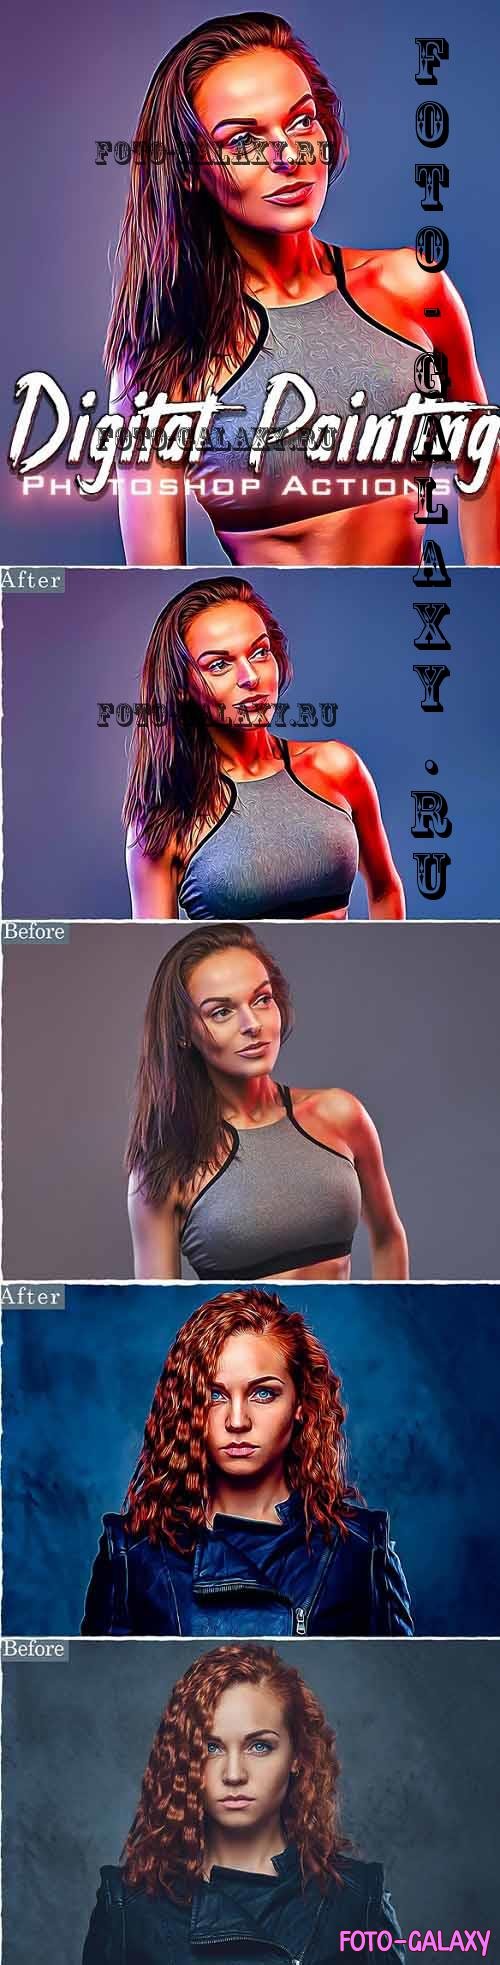 Digital Painting Photoshop Actions - 37148191